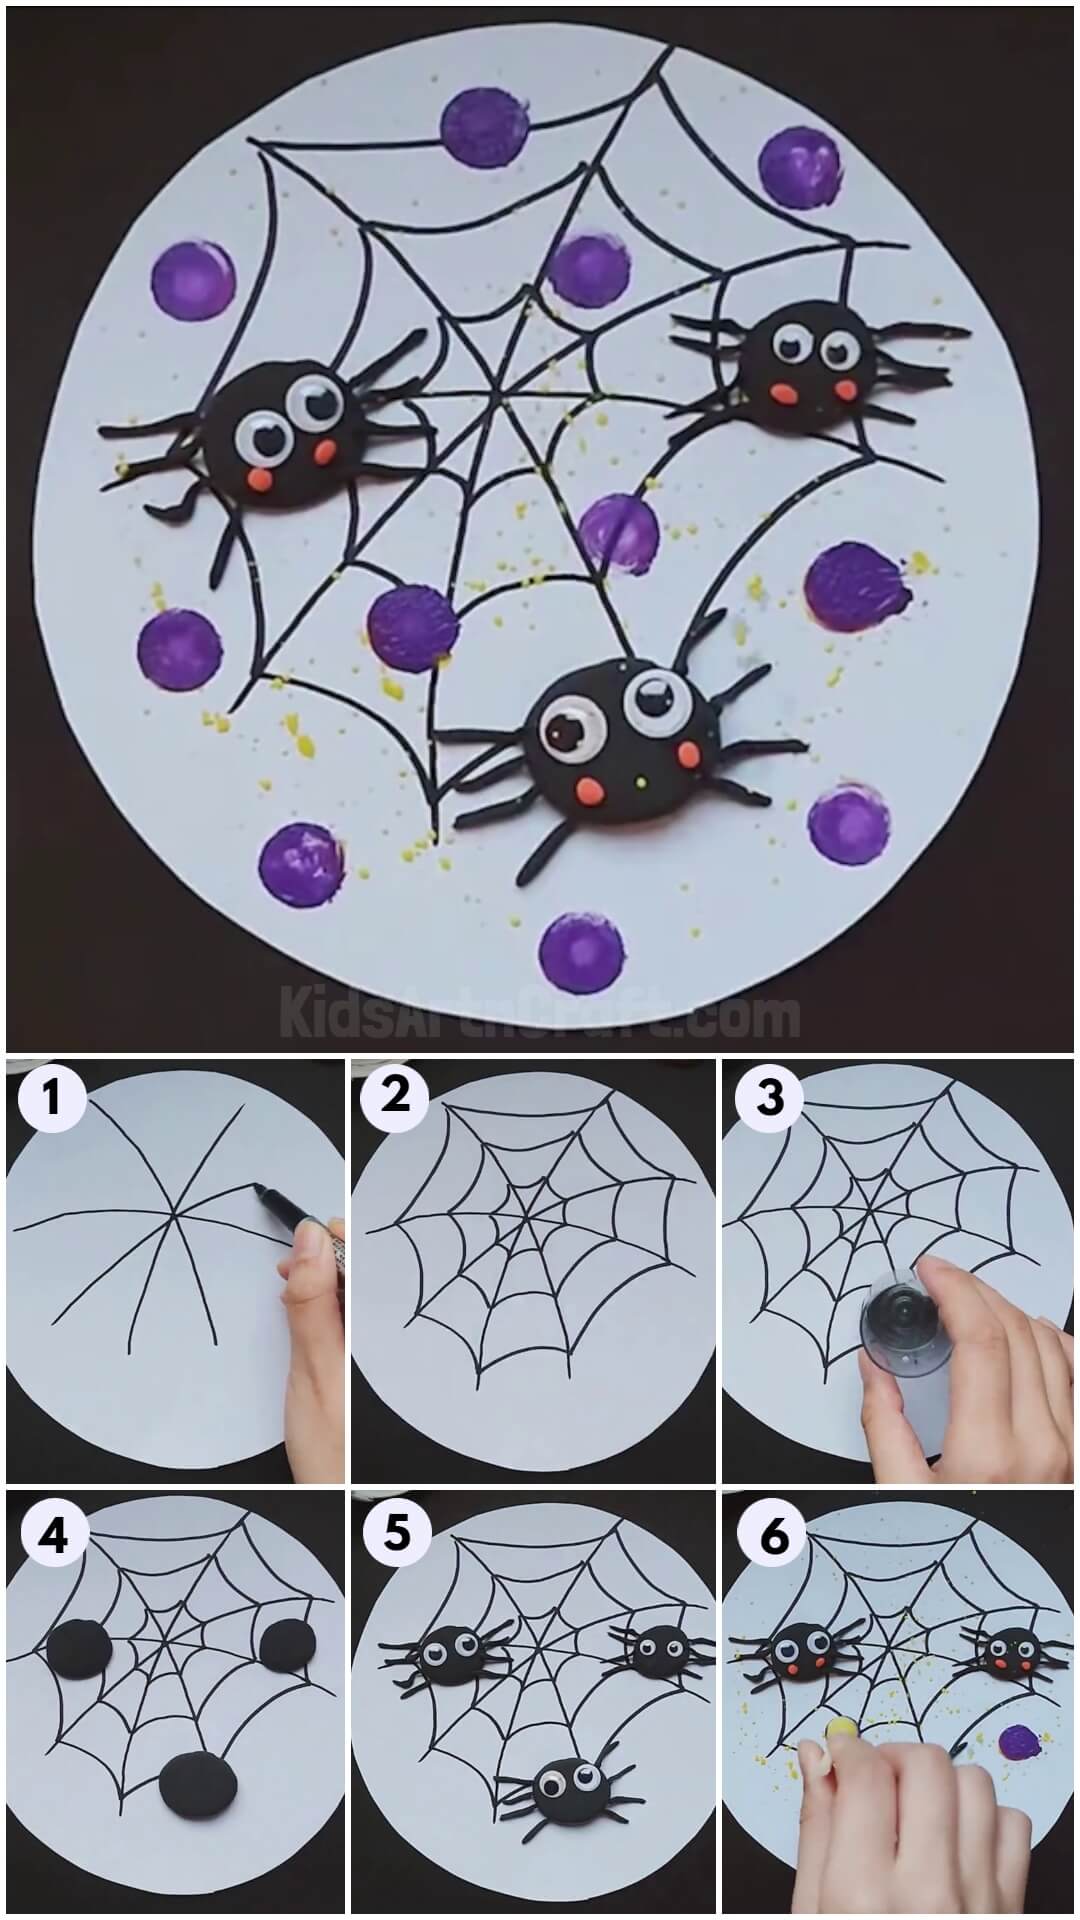 Easy To Learn Spider Web Craft Idea For Kids